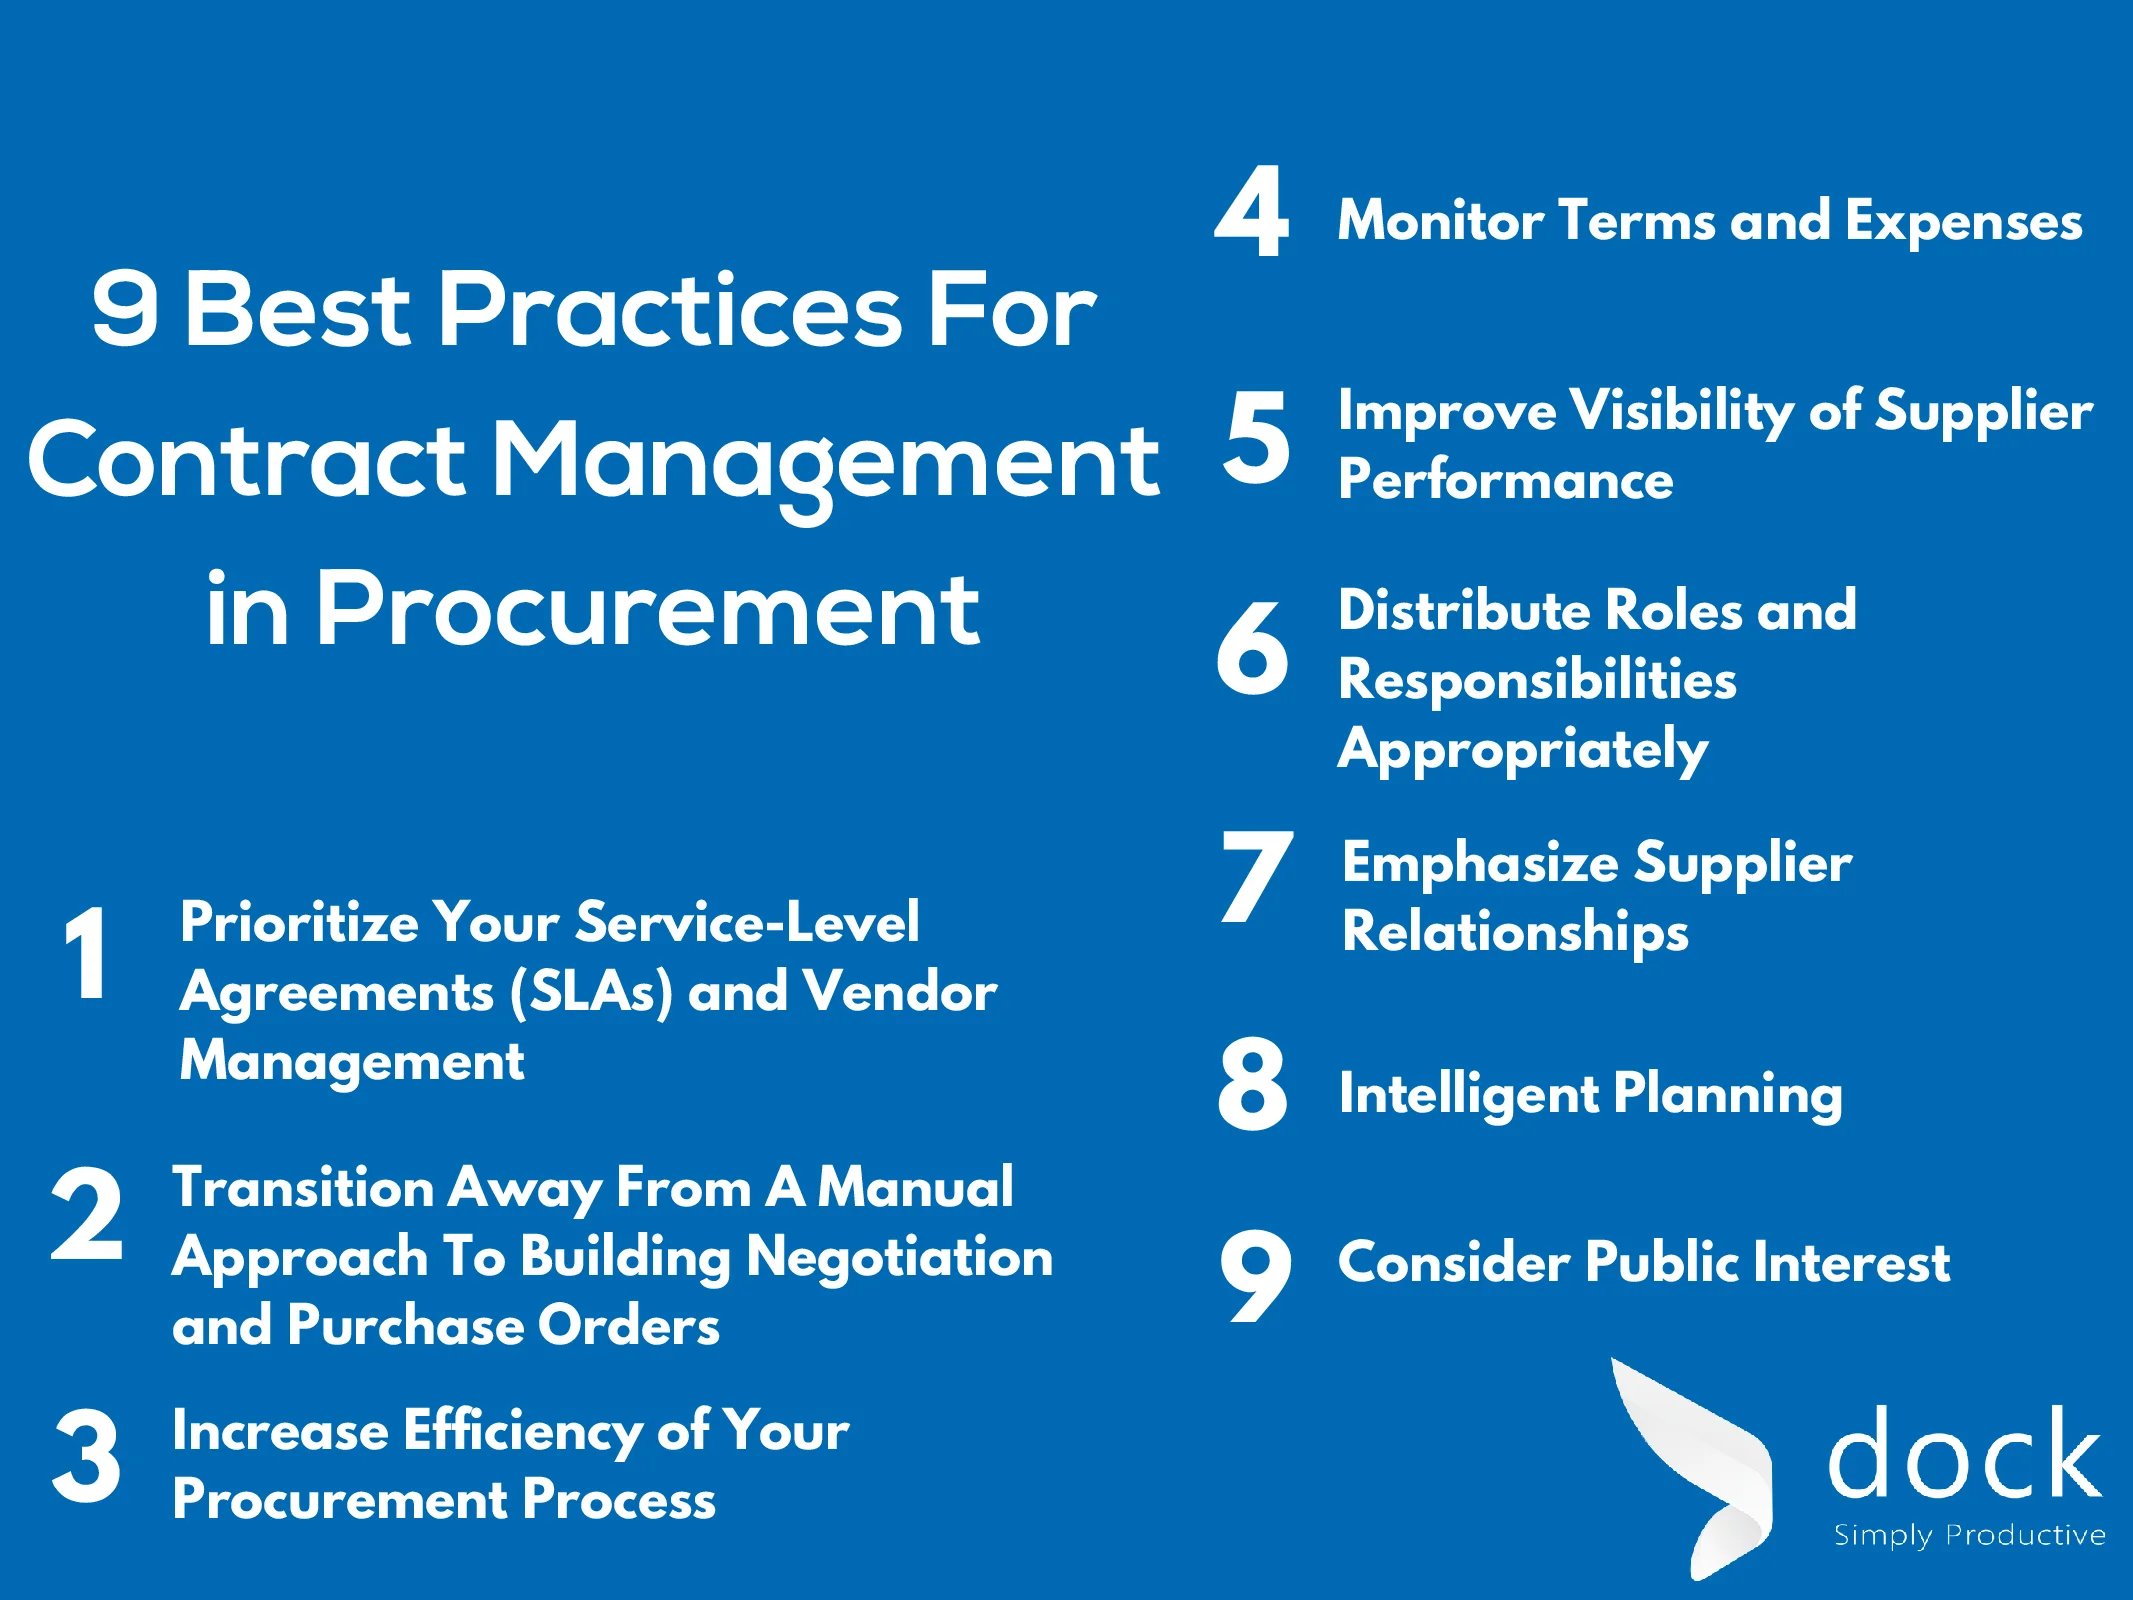 9 Best Practices For Contract Management in Procurement